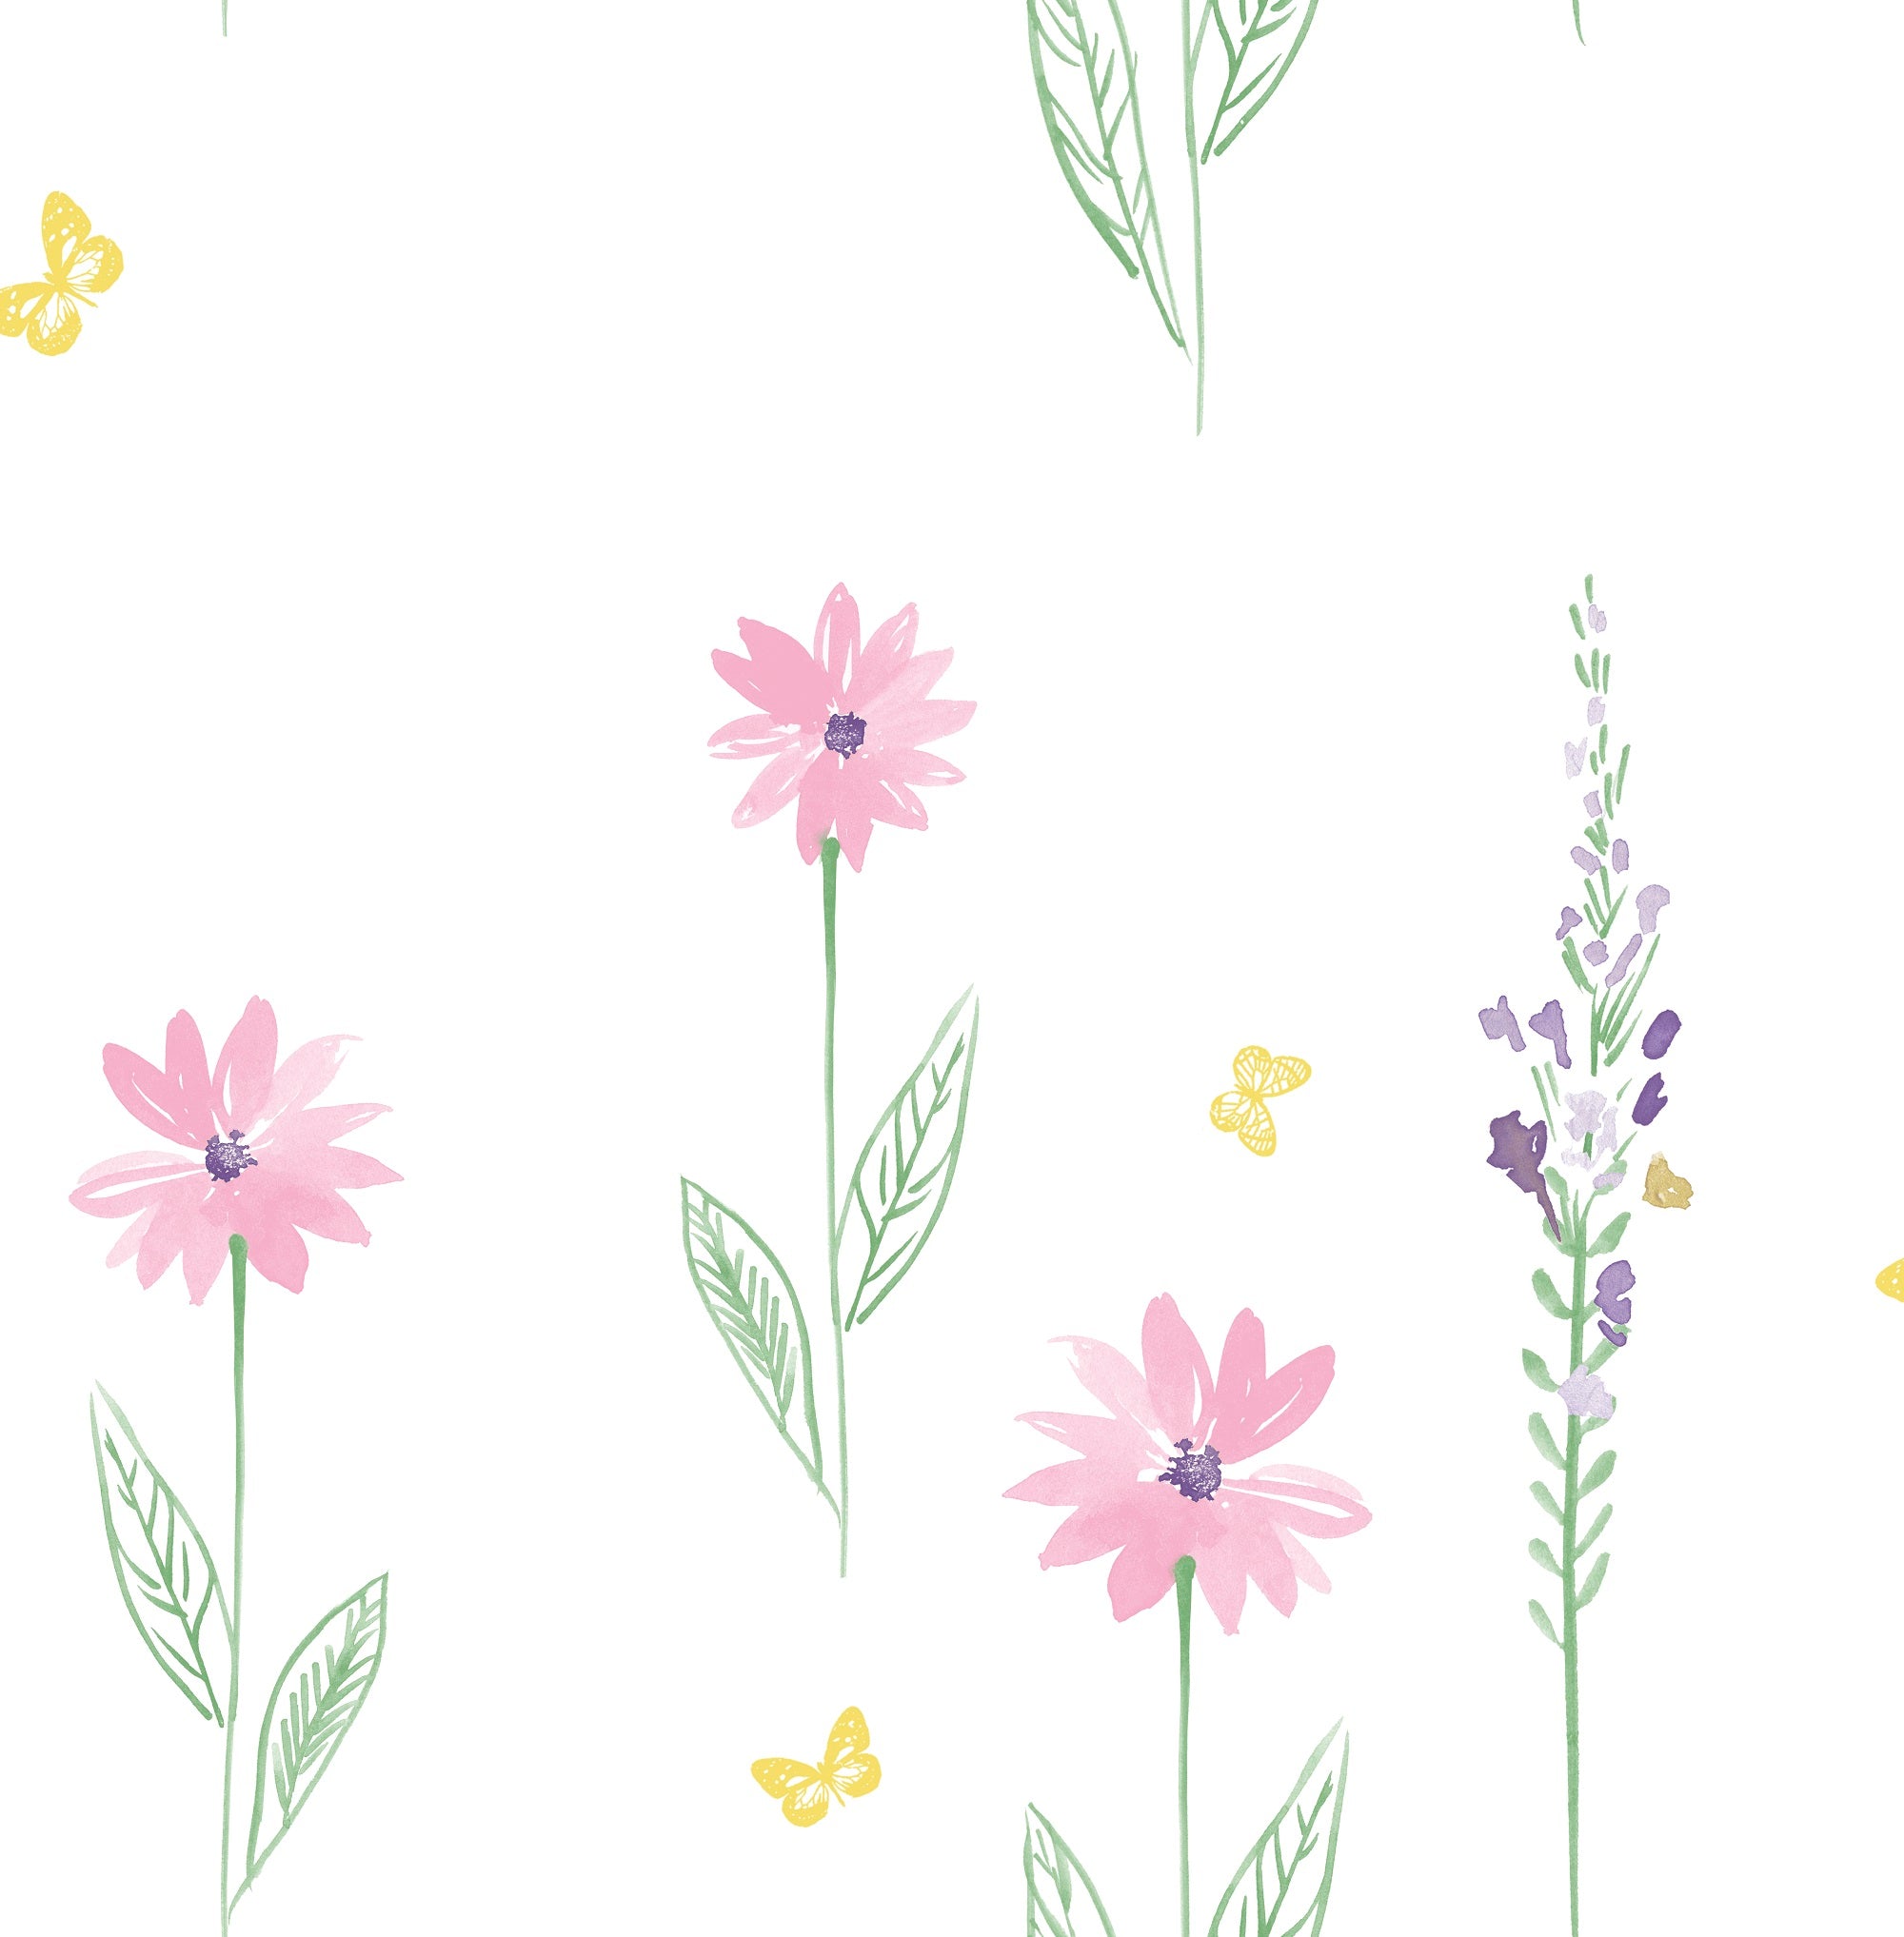 Daisy Field Wallpaper In Pink And Green From The Day Dreamers Images, Photos, Reviews